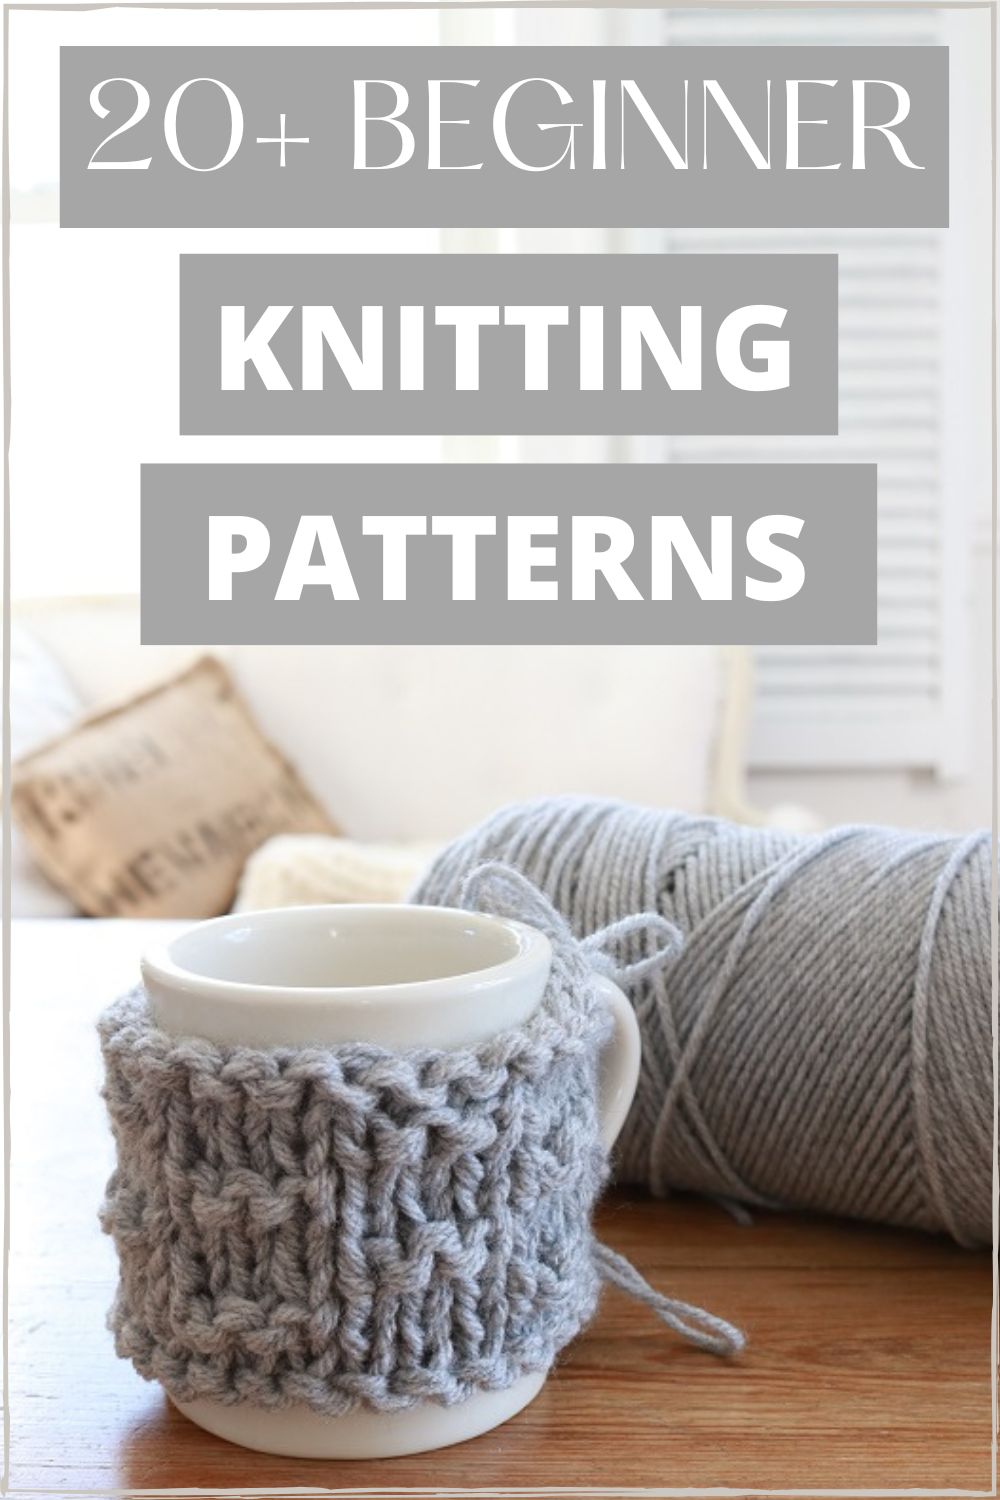 Over 20 Easy Knitting Patterns for Beginners {FREE} - A BOX OF TWINE